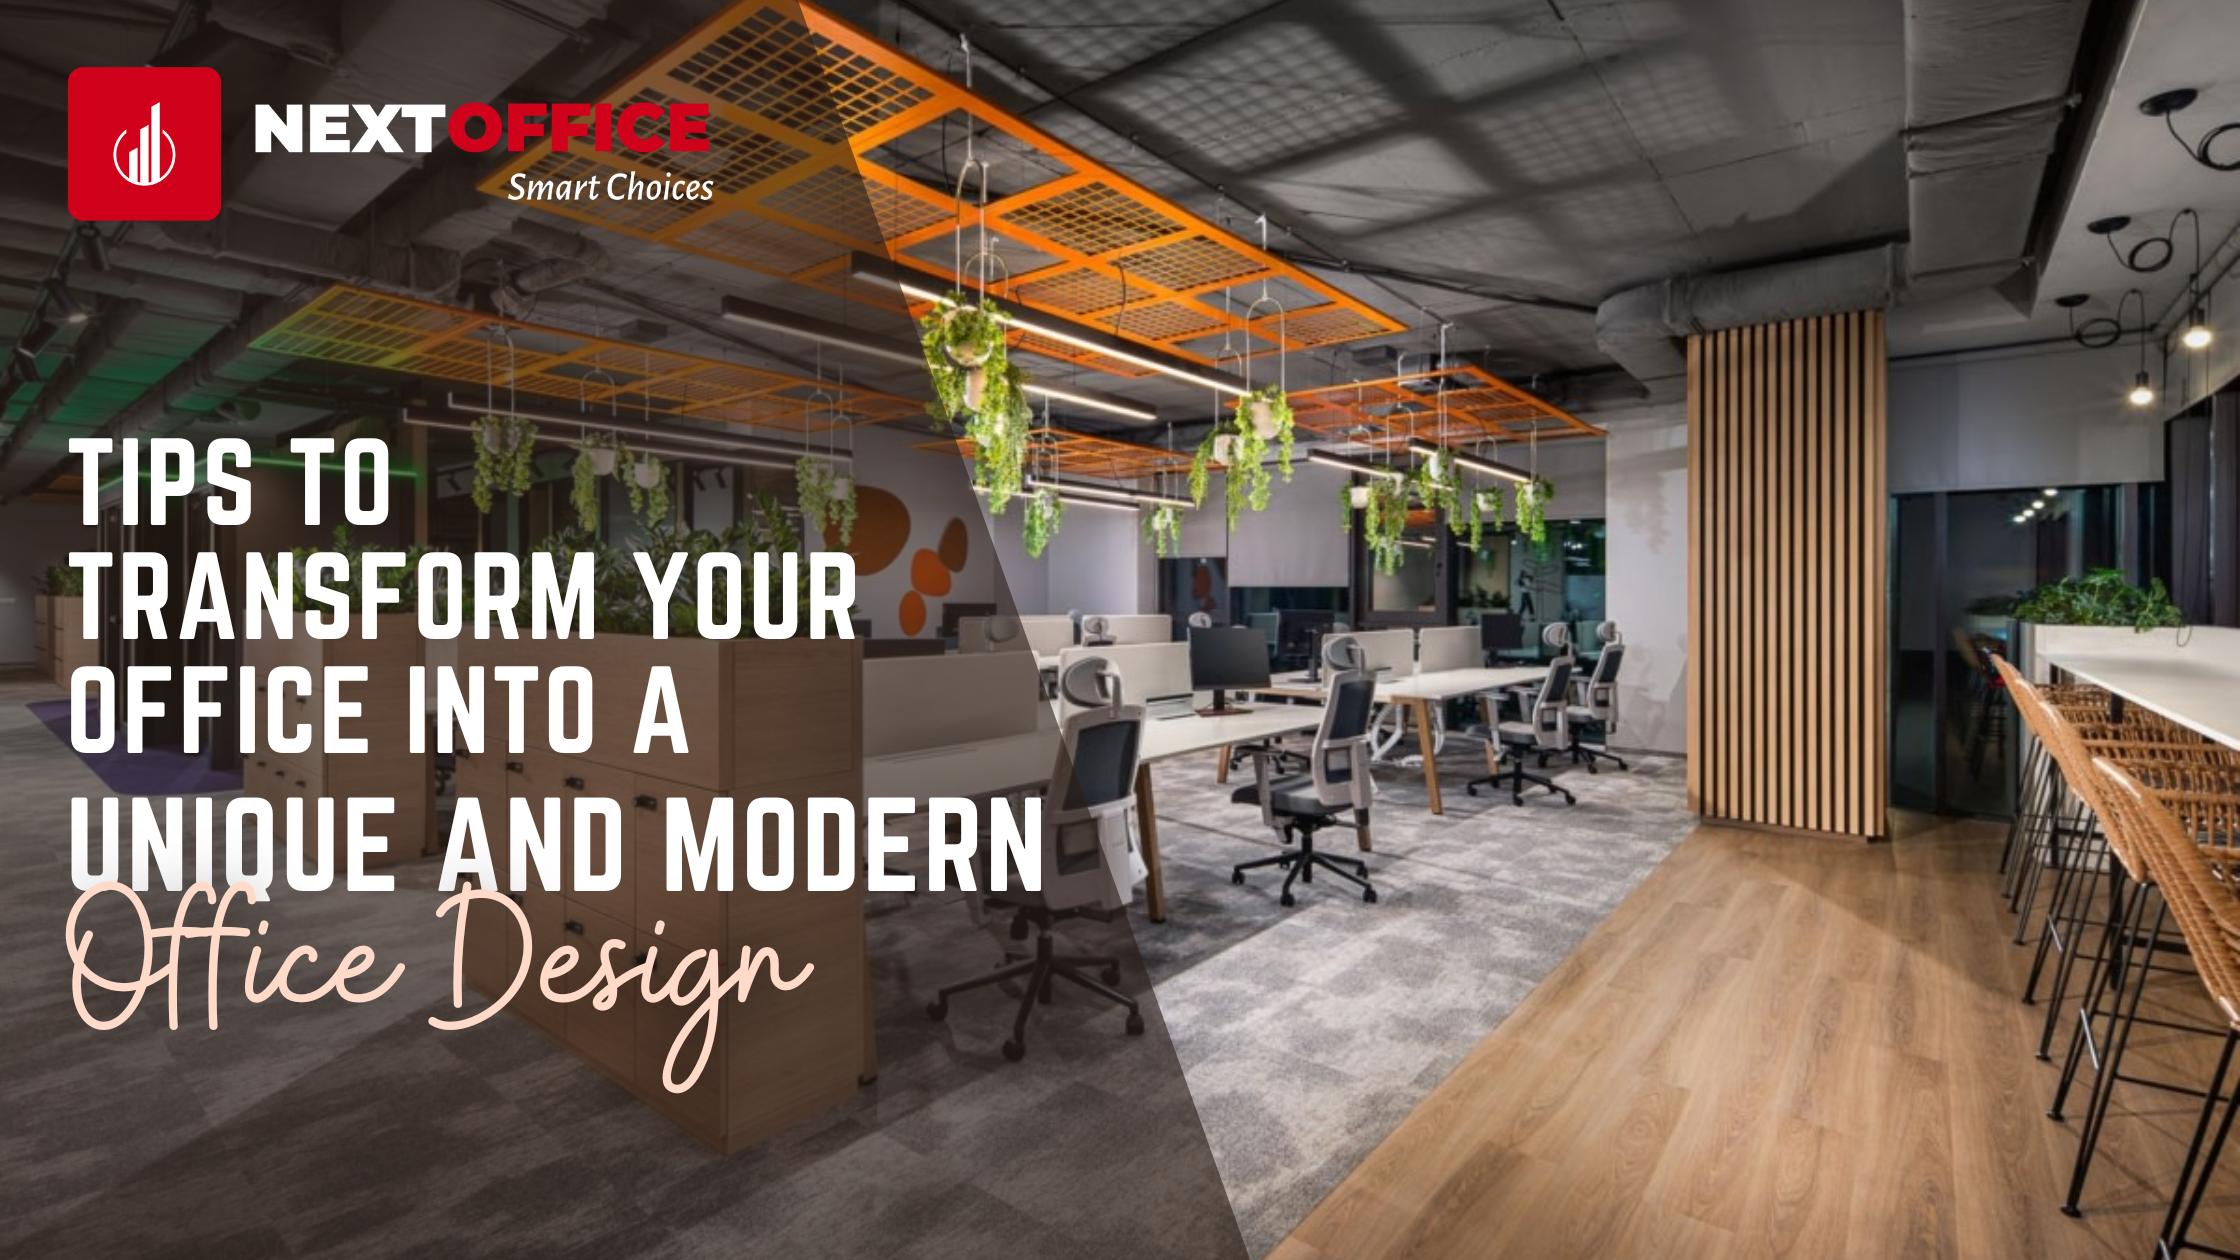 Tips To Transform Your Office Into A Unique And Modern Office Design